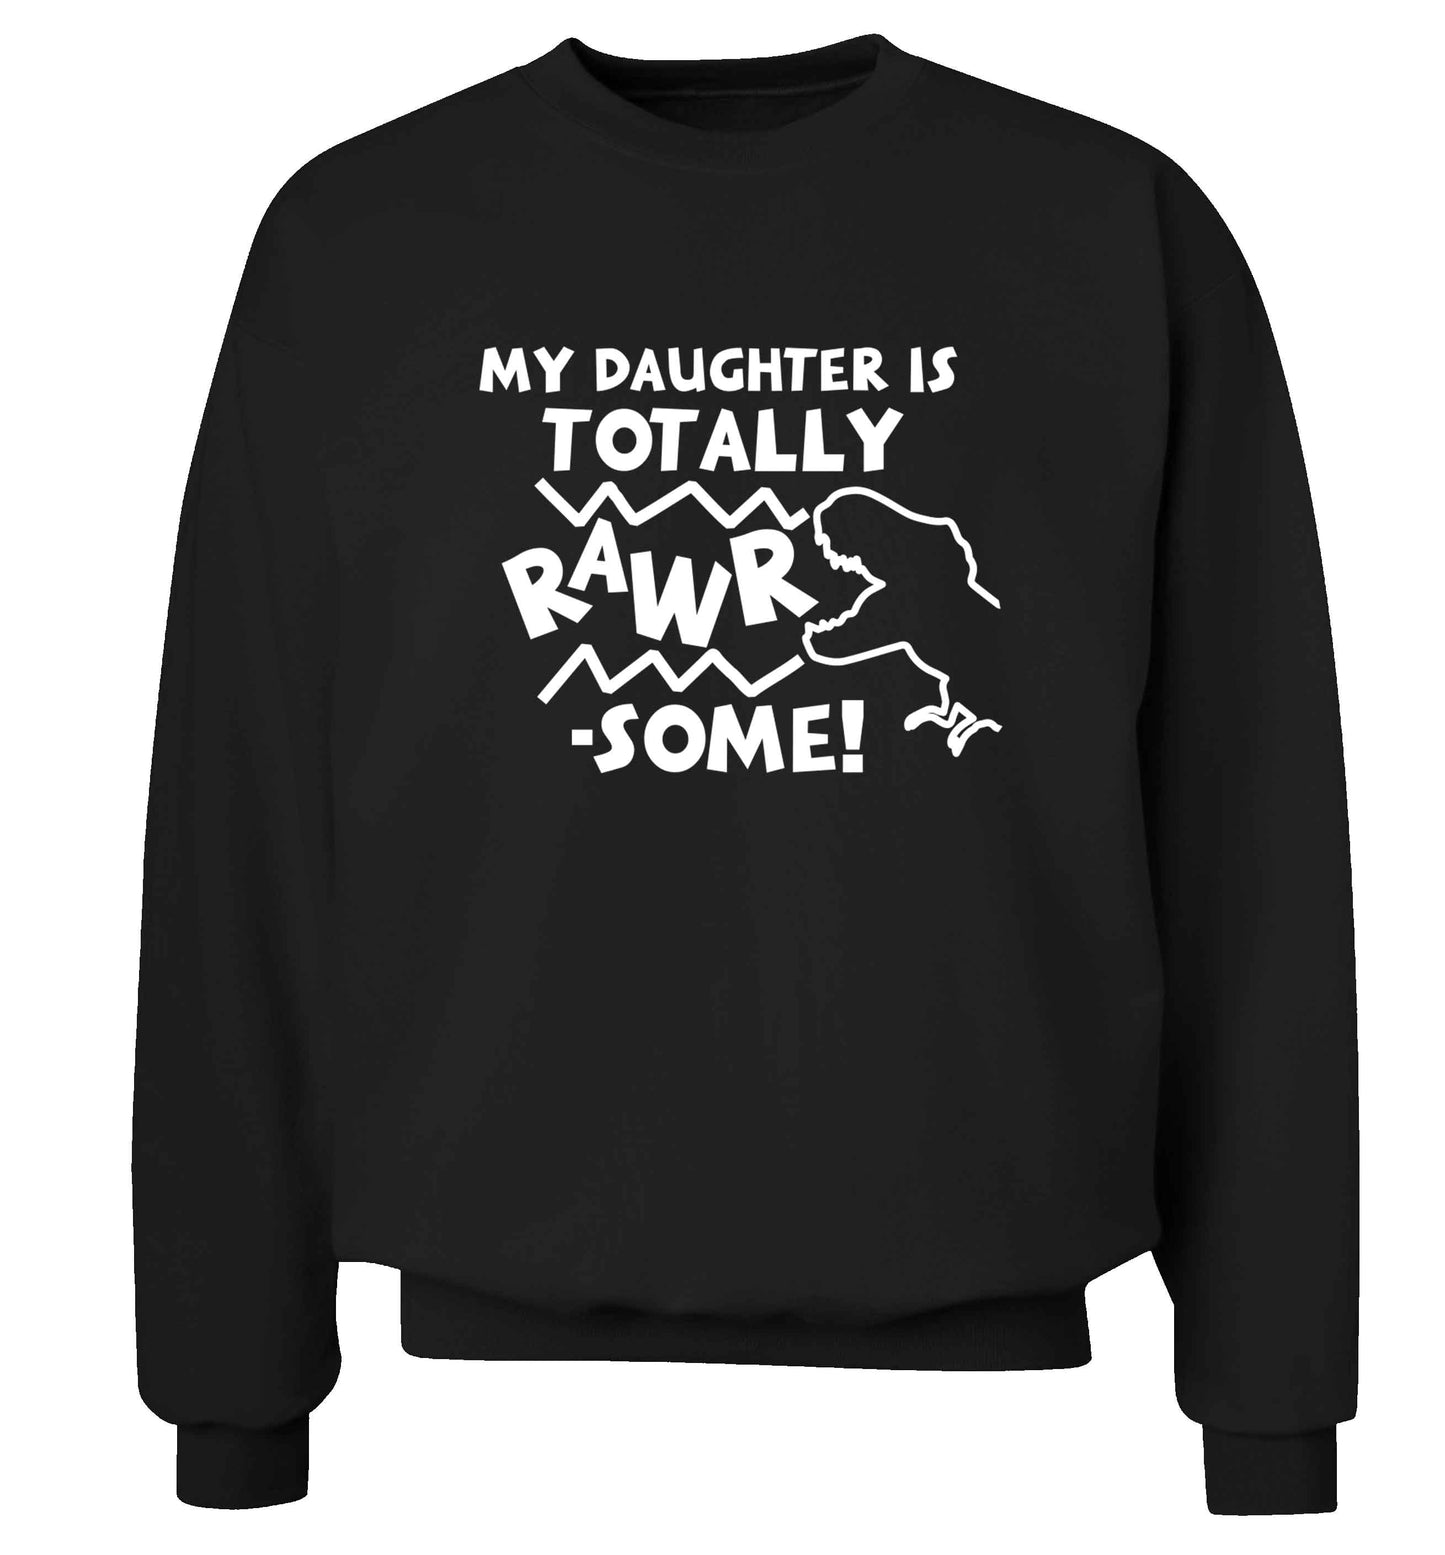 My daughter is totally rawrsome adult's unisex black sweater 2XL